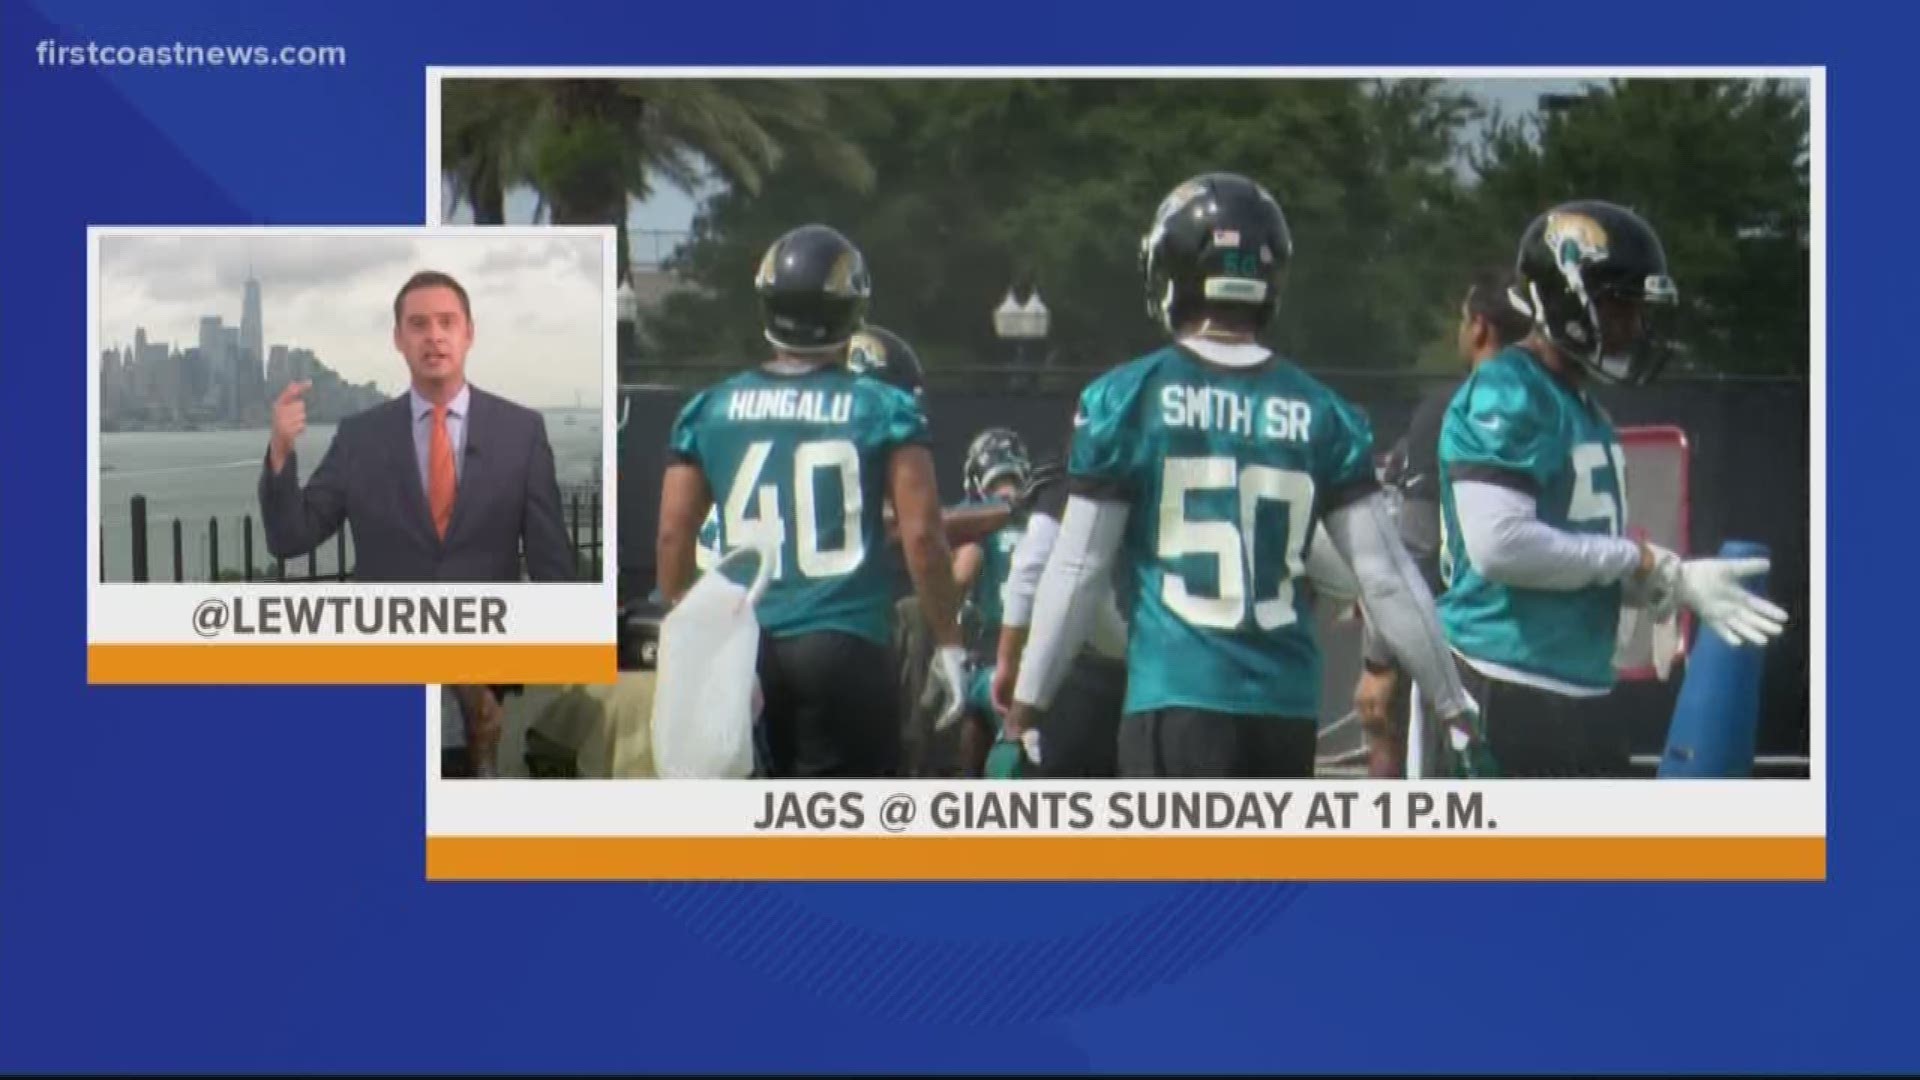 Anchor Lewis Turner joins us from New York where he's there to cover the game between the Jacksonville Jaguars and the New York Giants.